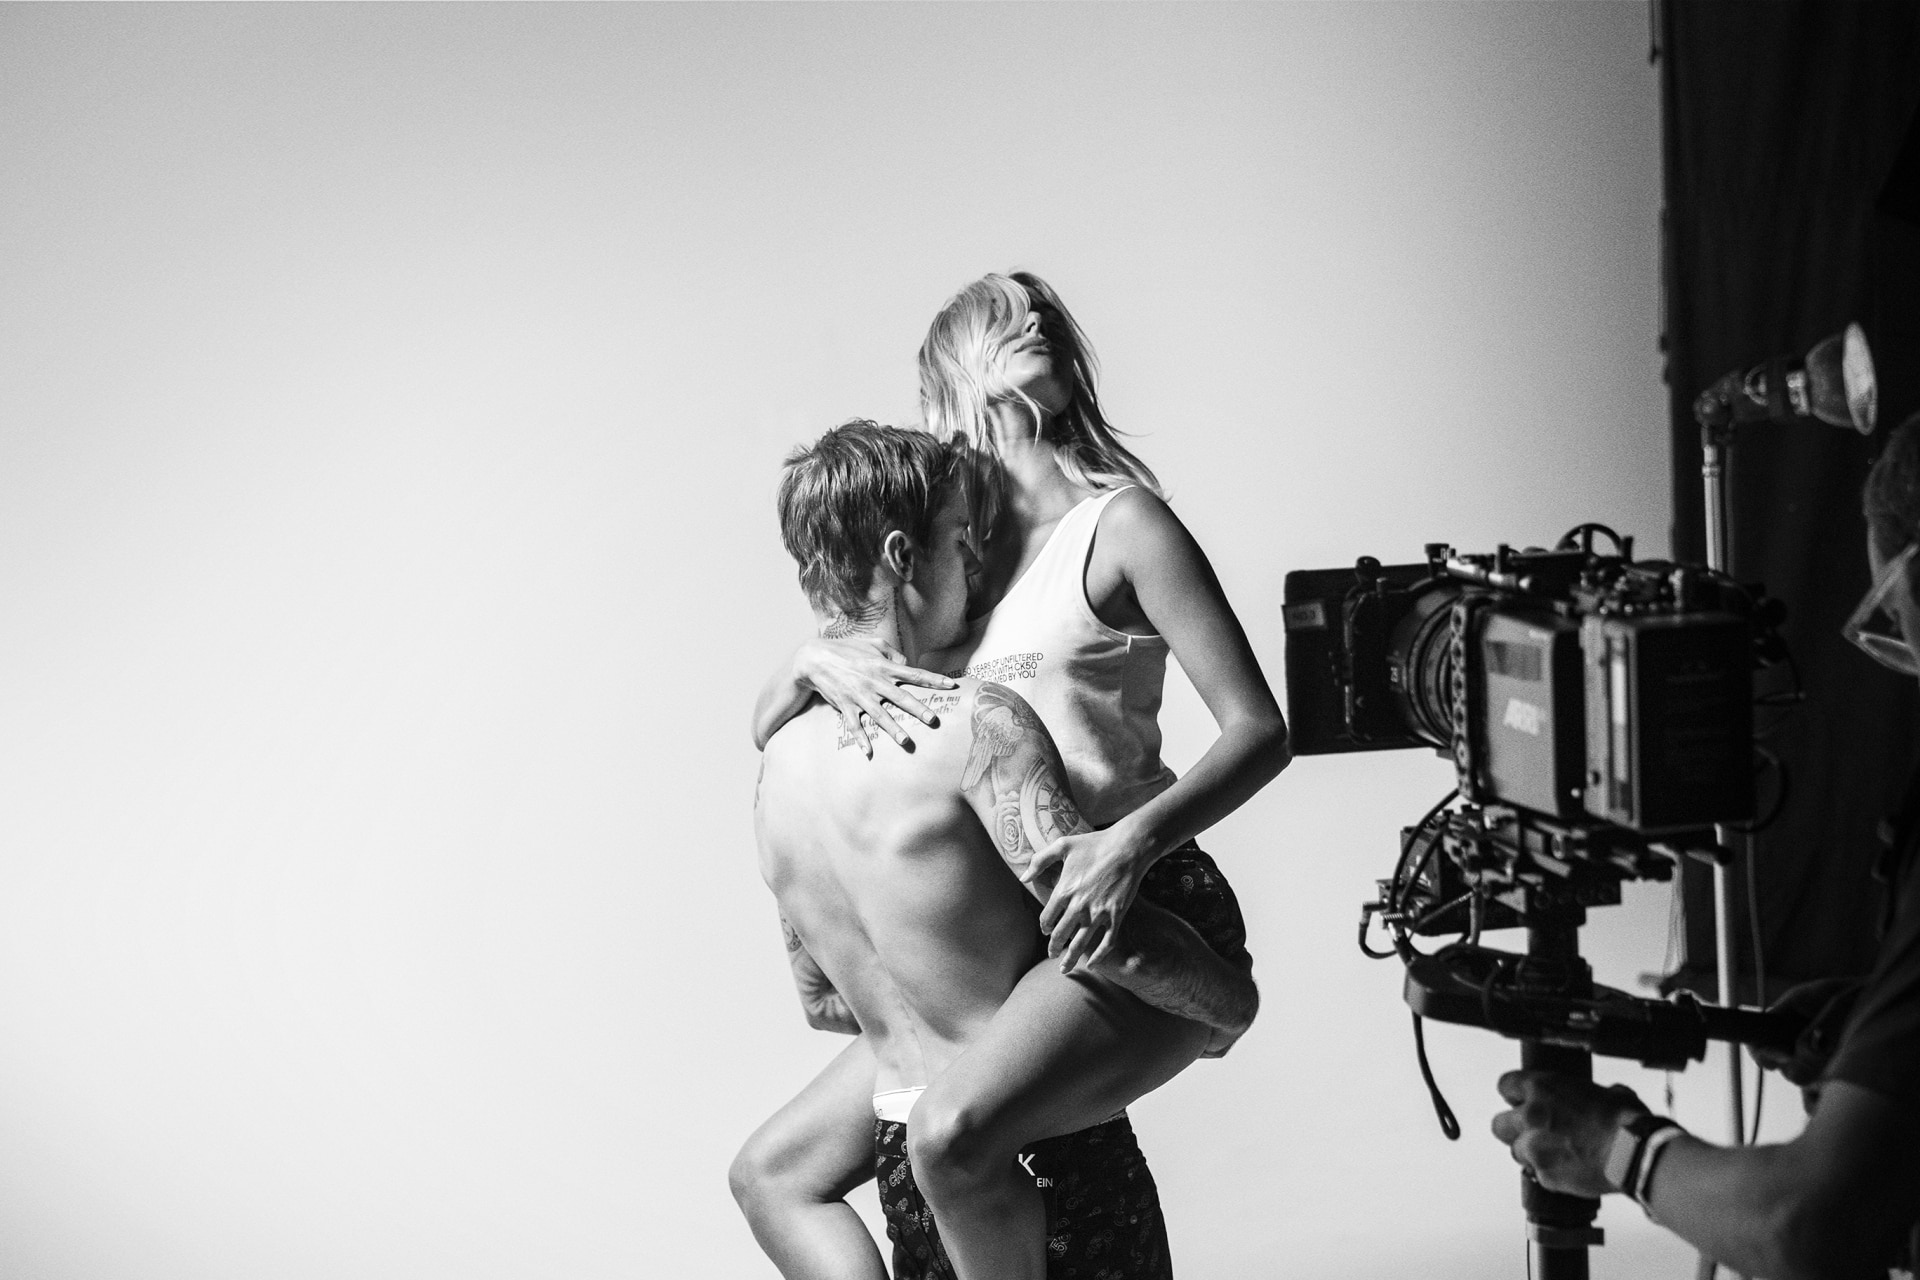 A rare, behind-the-scenes look at the couple's campaign appearance. Image credit: courtesy of Calvin Klein